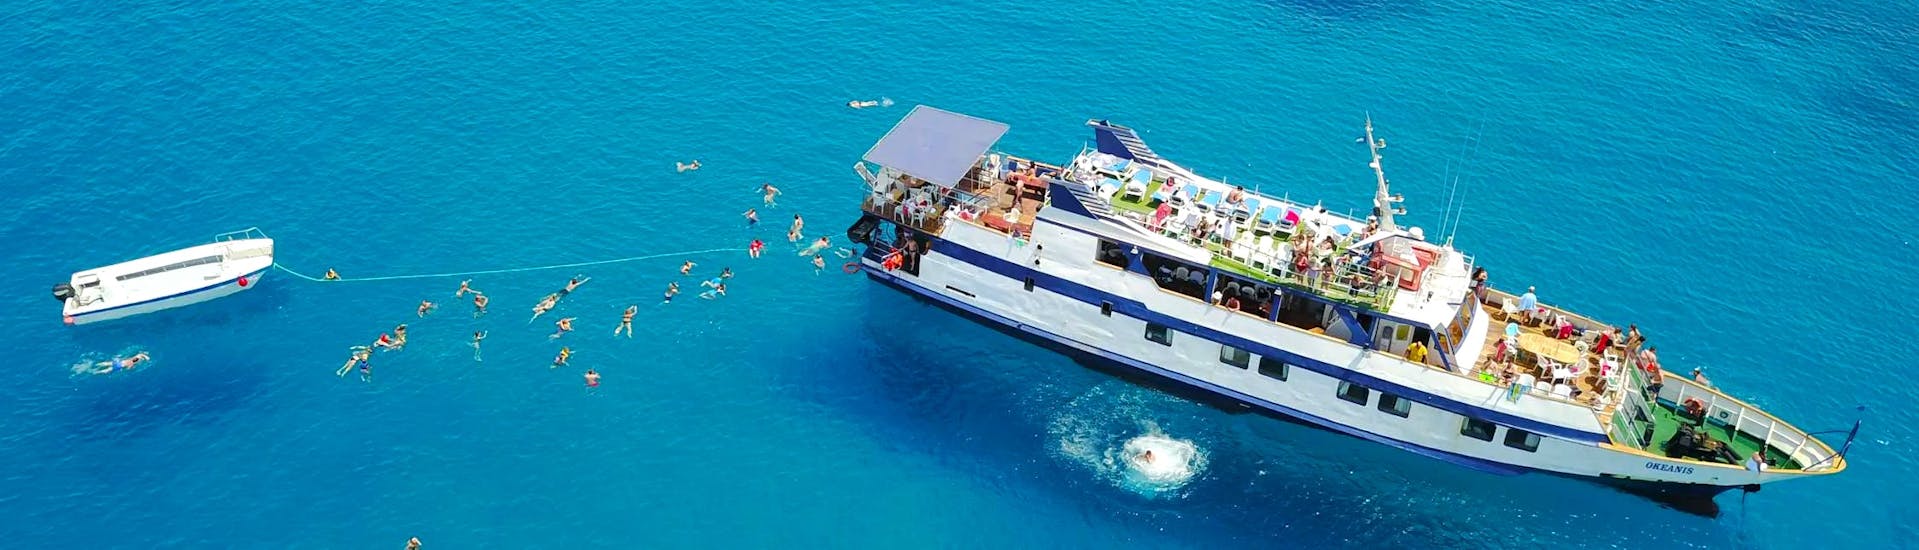 People enjoying a Boat Trip to the Zenobia Shipwreck & Blue Lagoon with Snorkeling & Lunch with Larnaca Napa Sea Cruises.